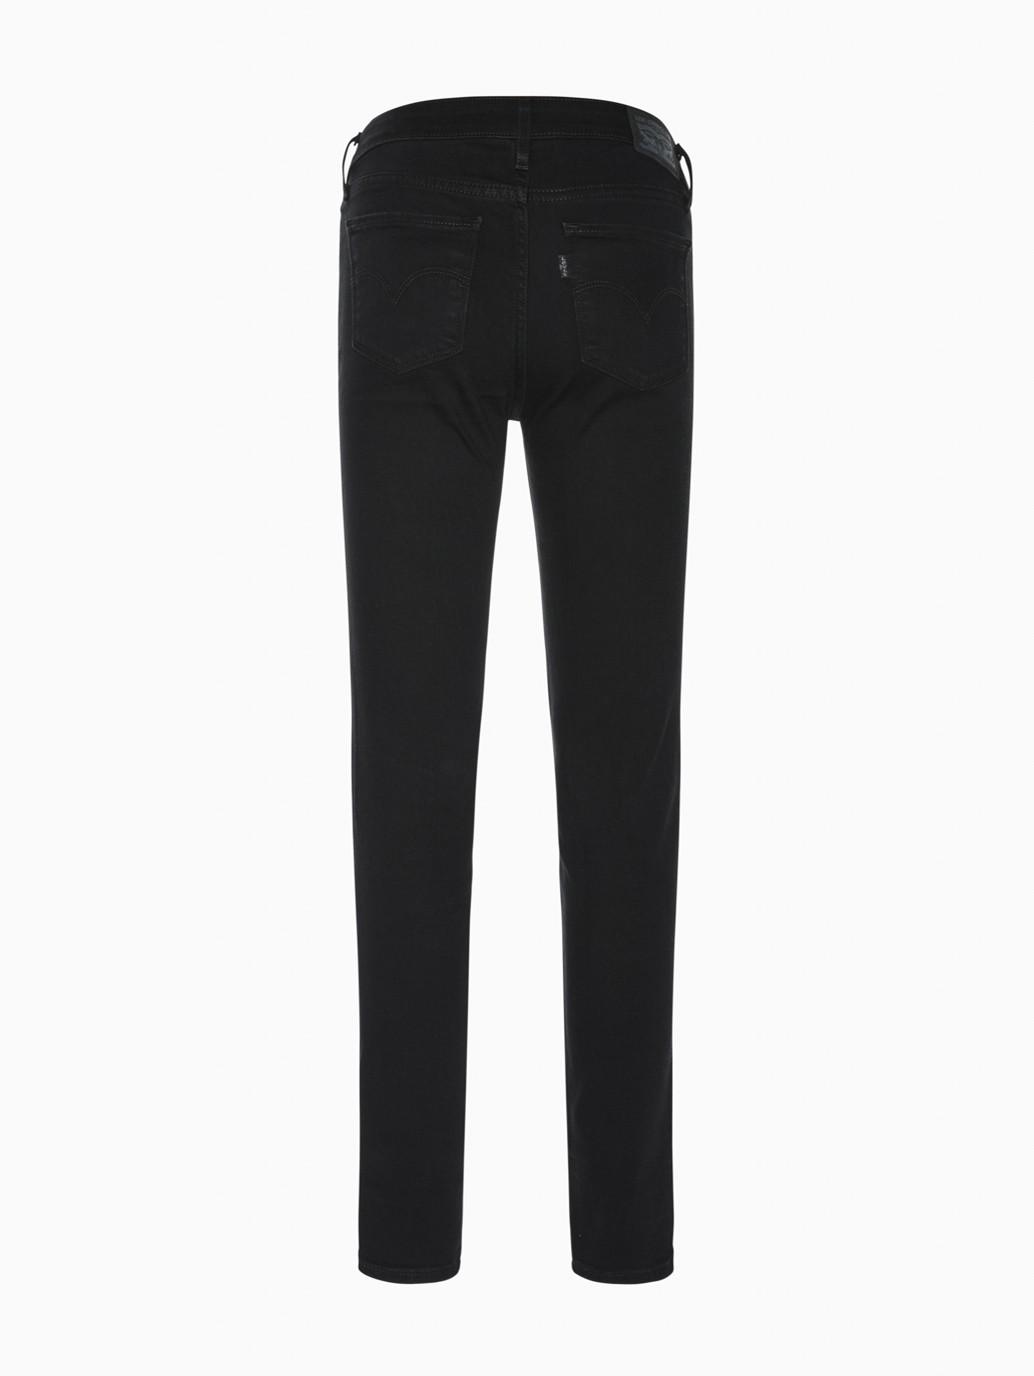 levis malaysia Levis 711 Skinny Jeans 188810049 14 Details